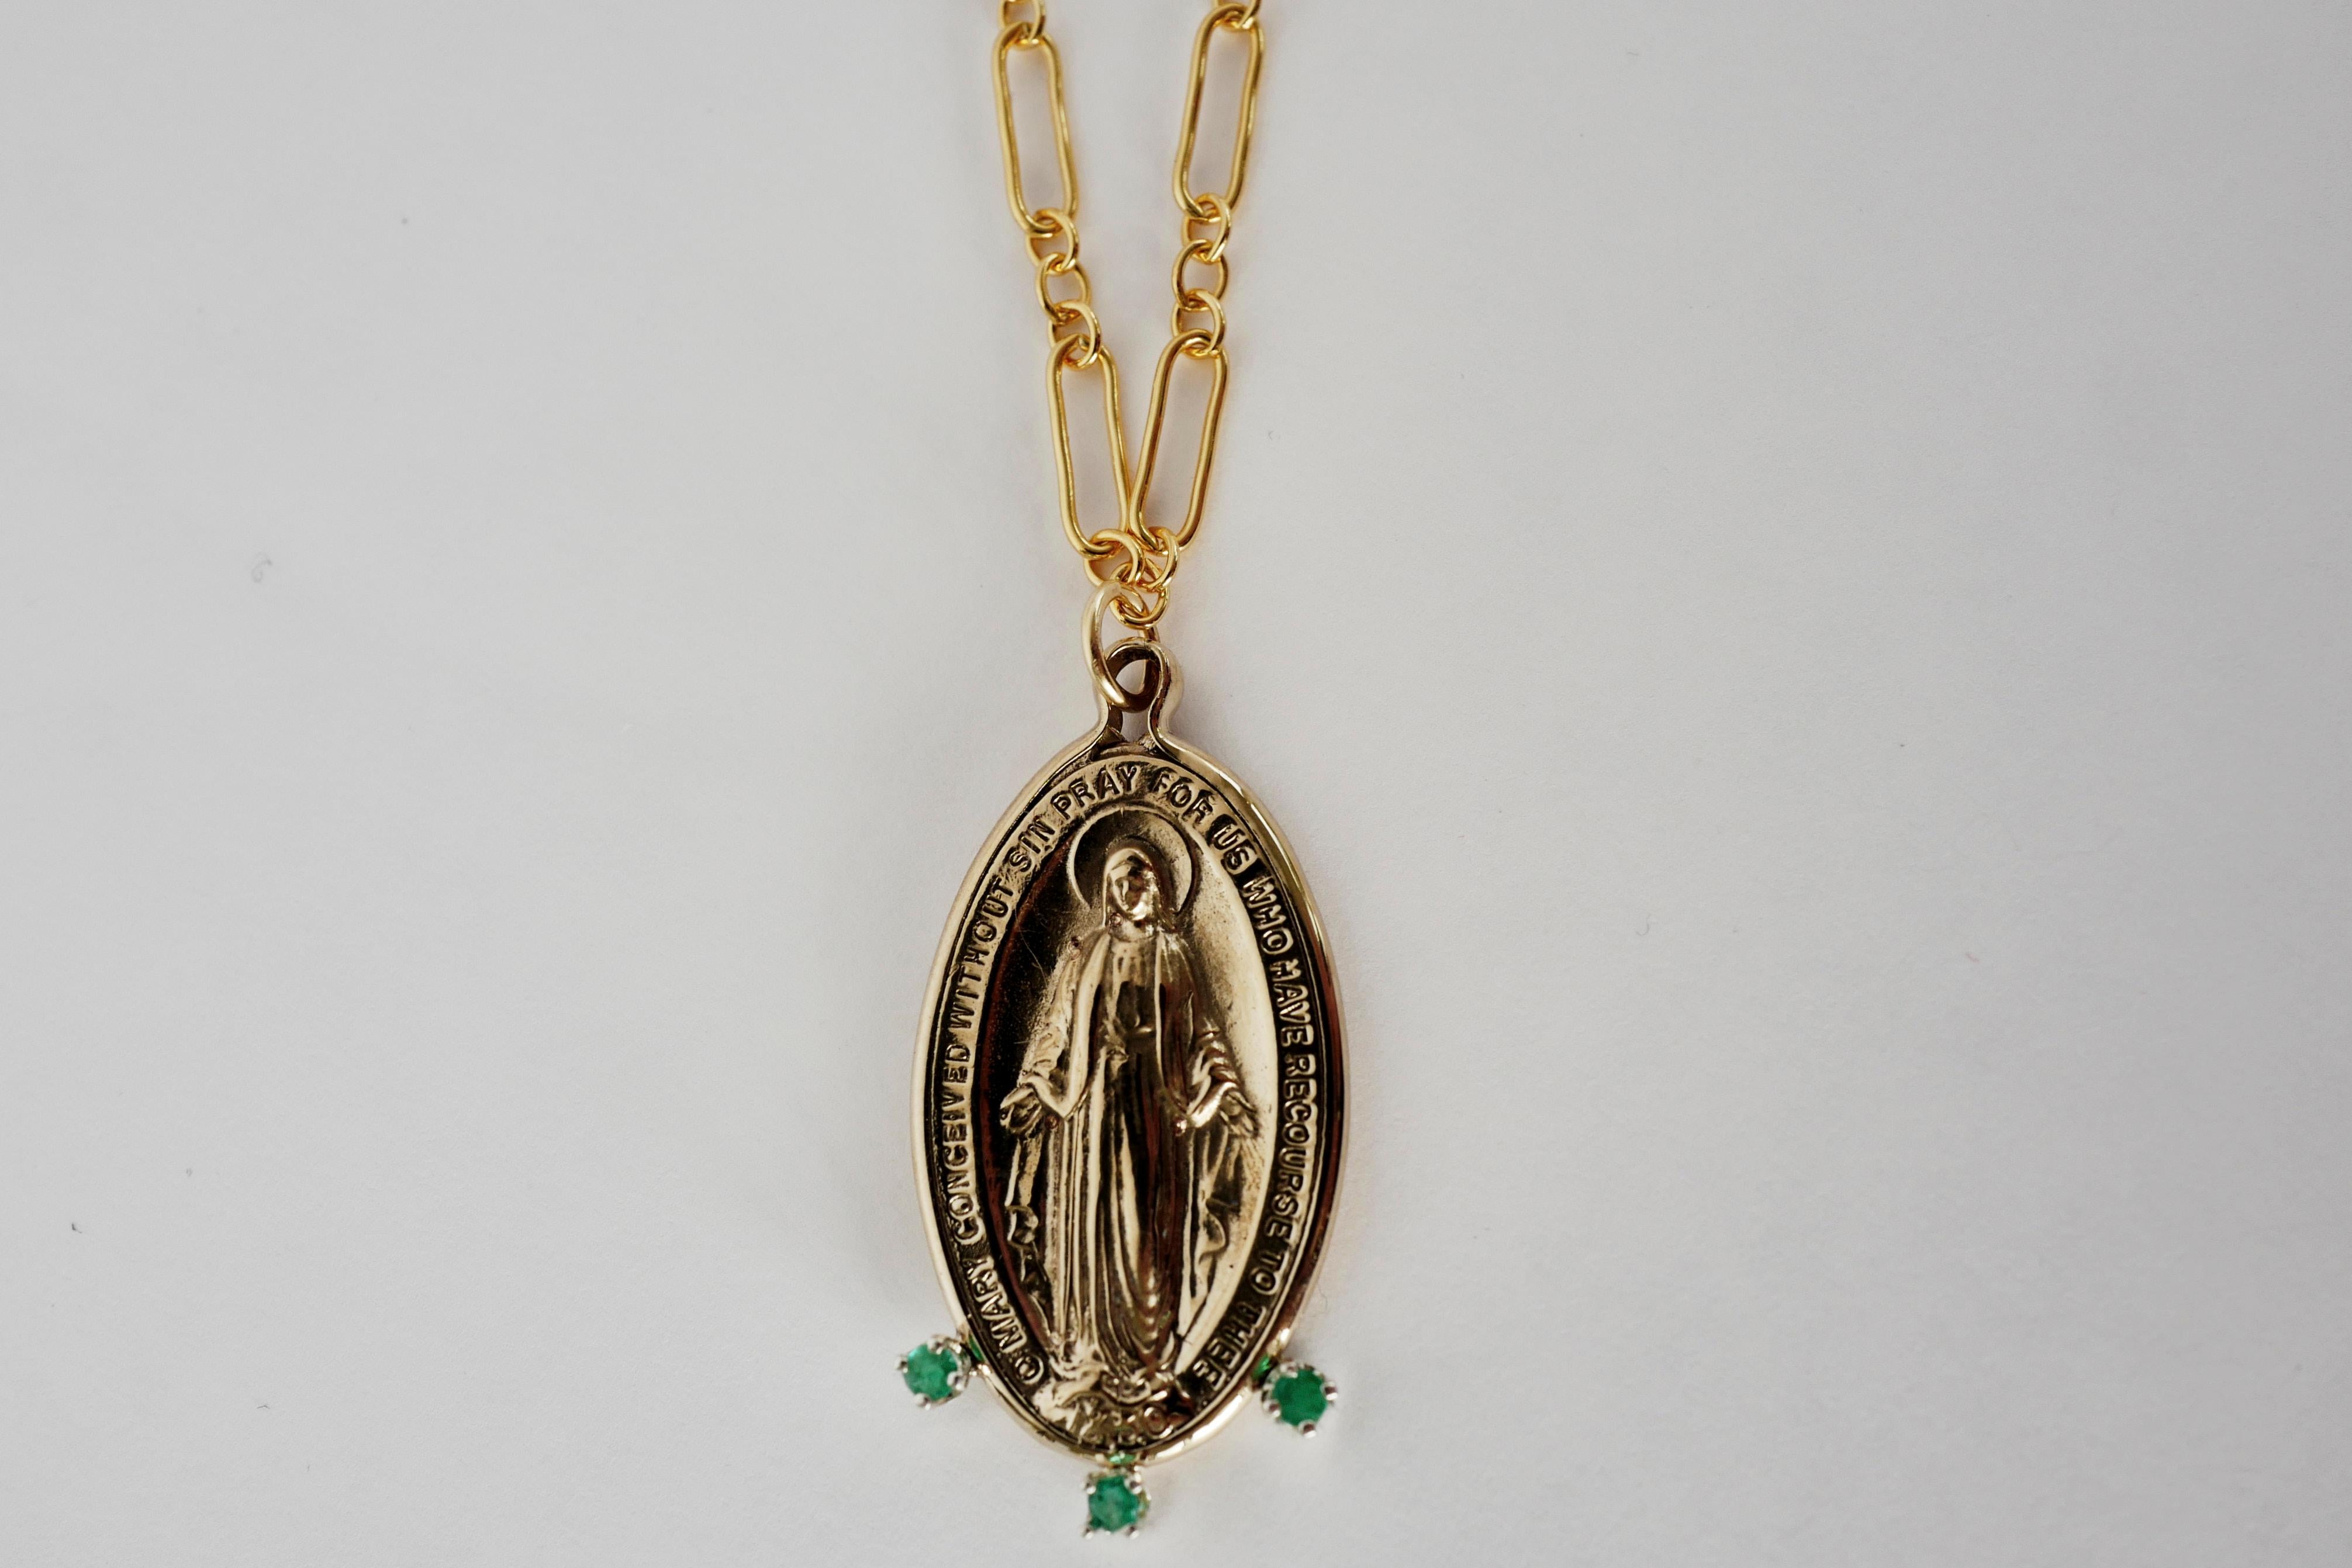 Women's Emerald Virgin Mary Medal Pendant Chain Necklace J Dauphin For Sale